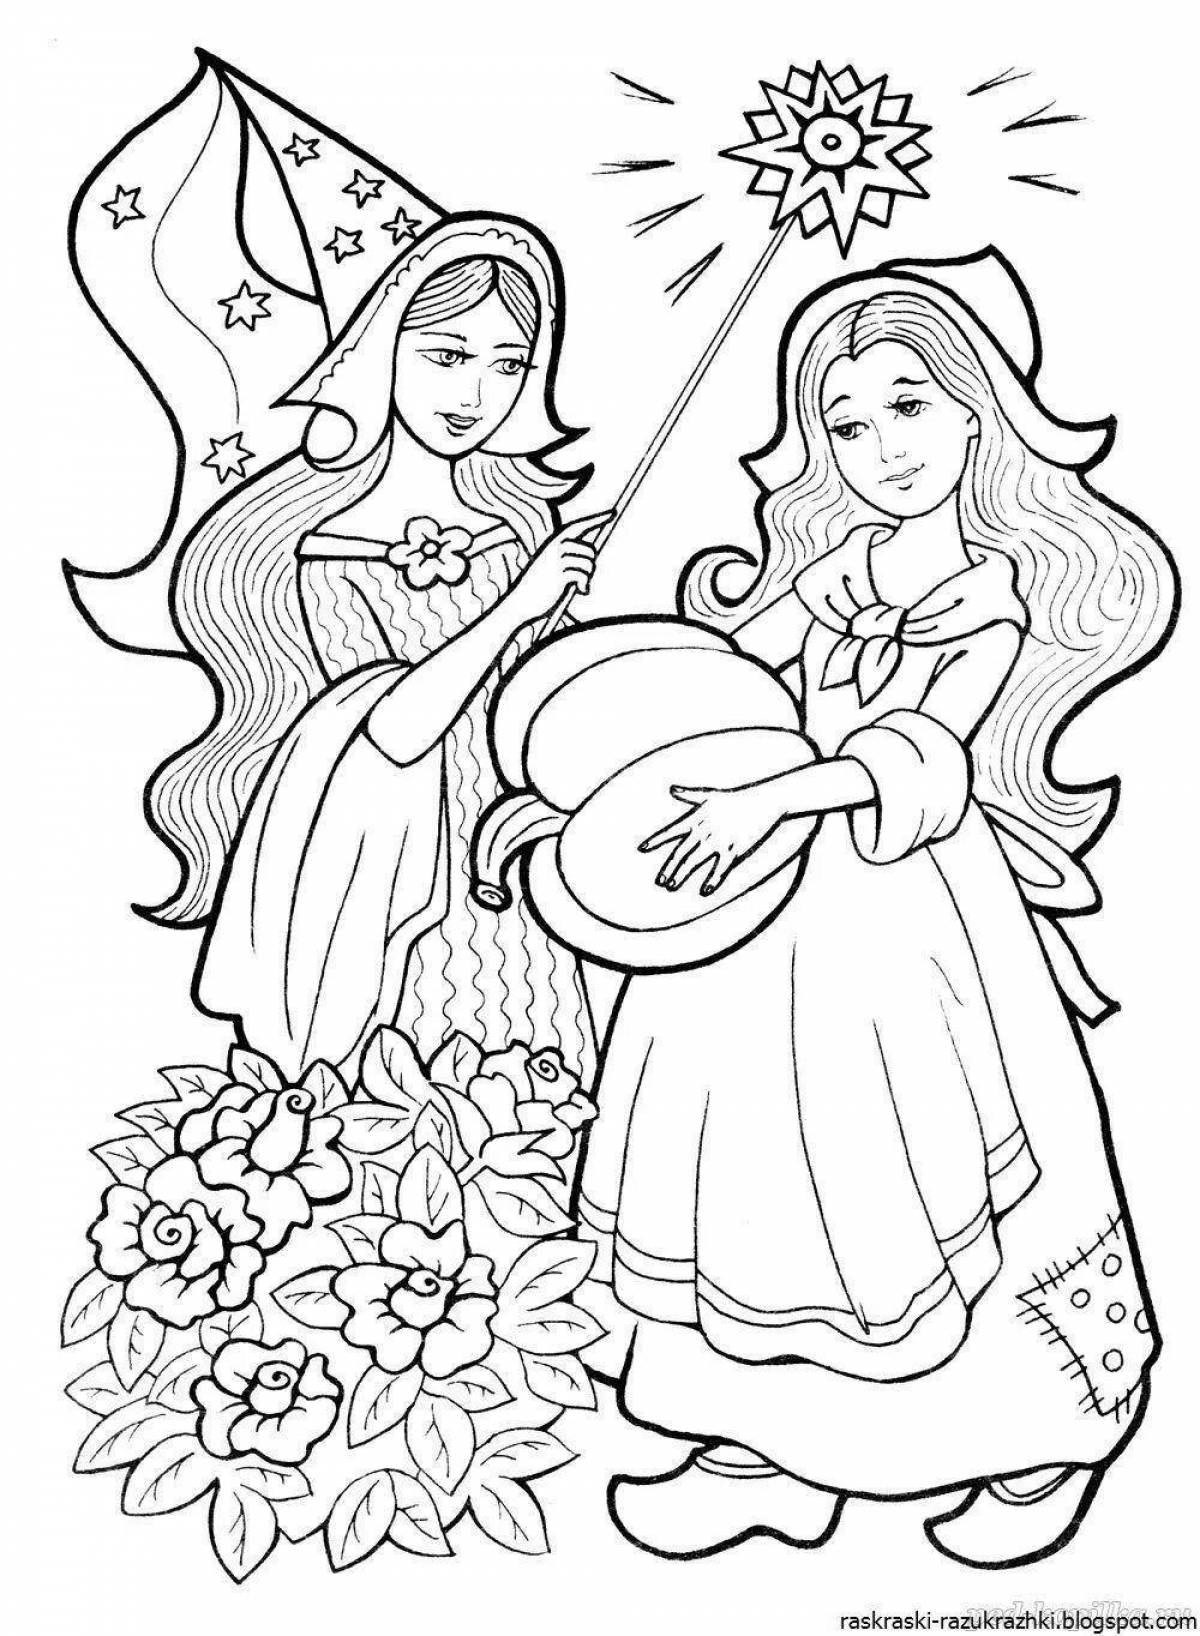 Enticing coloring book heroes of Charles Perrault's fairy tales